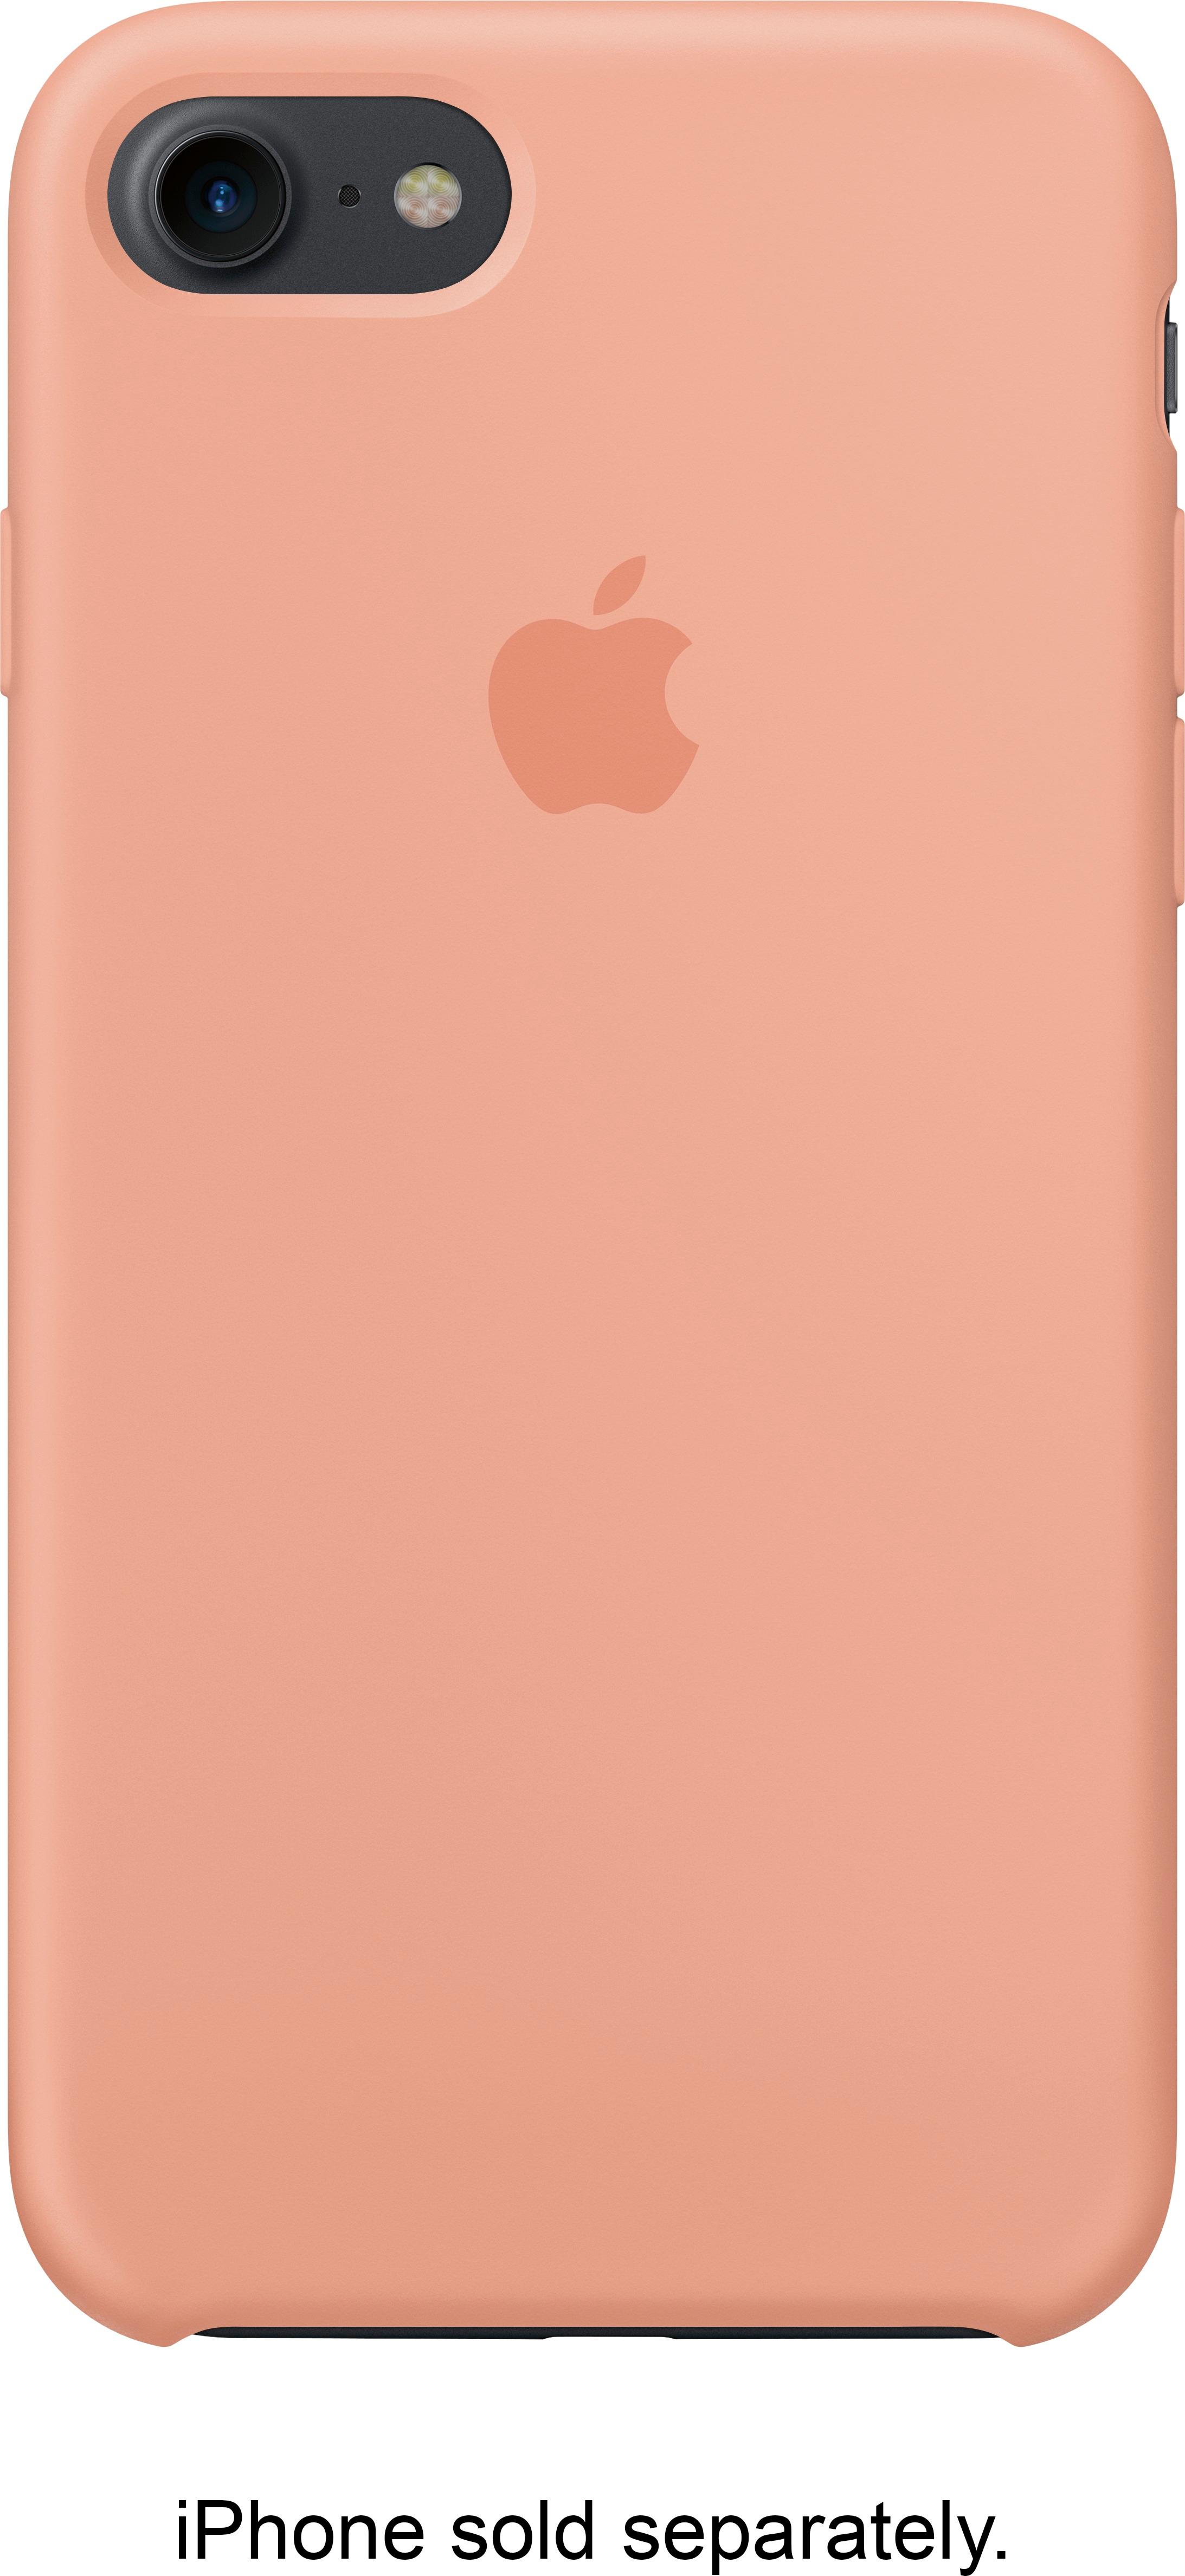 Apple iPhone 7 Silicone Case Flamingo MQ592ZM/A - Best Buy